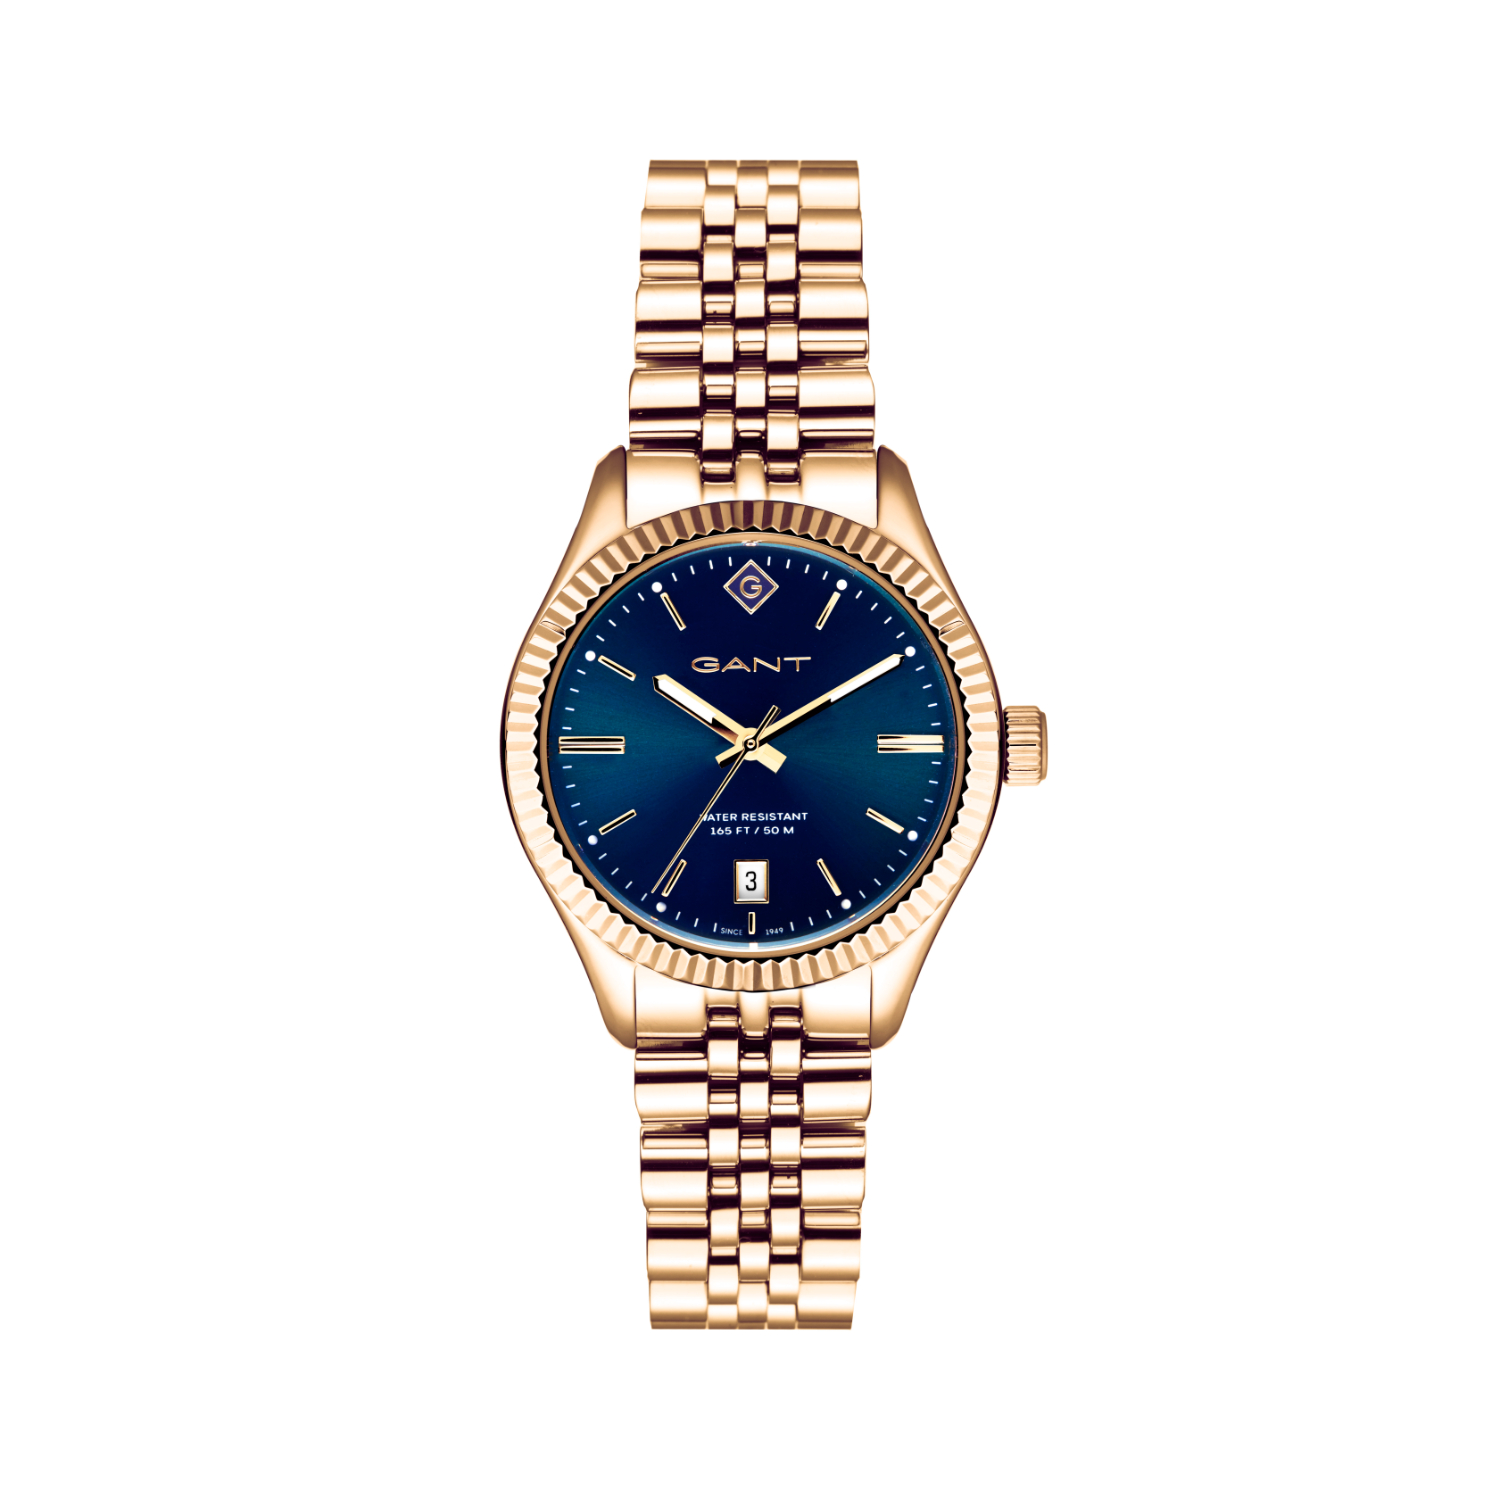 Womens Gant watch in gold stainless steel with blue dial and bracelet.